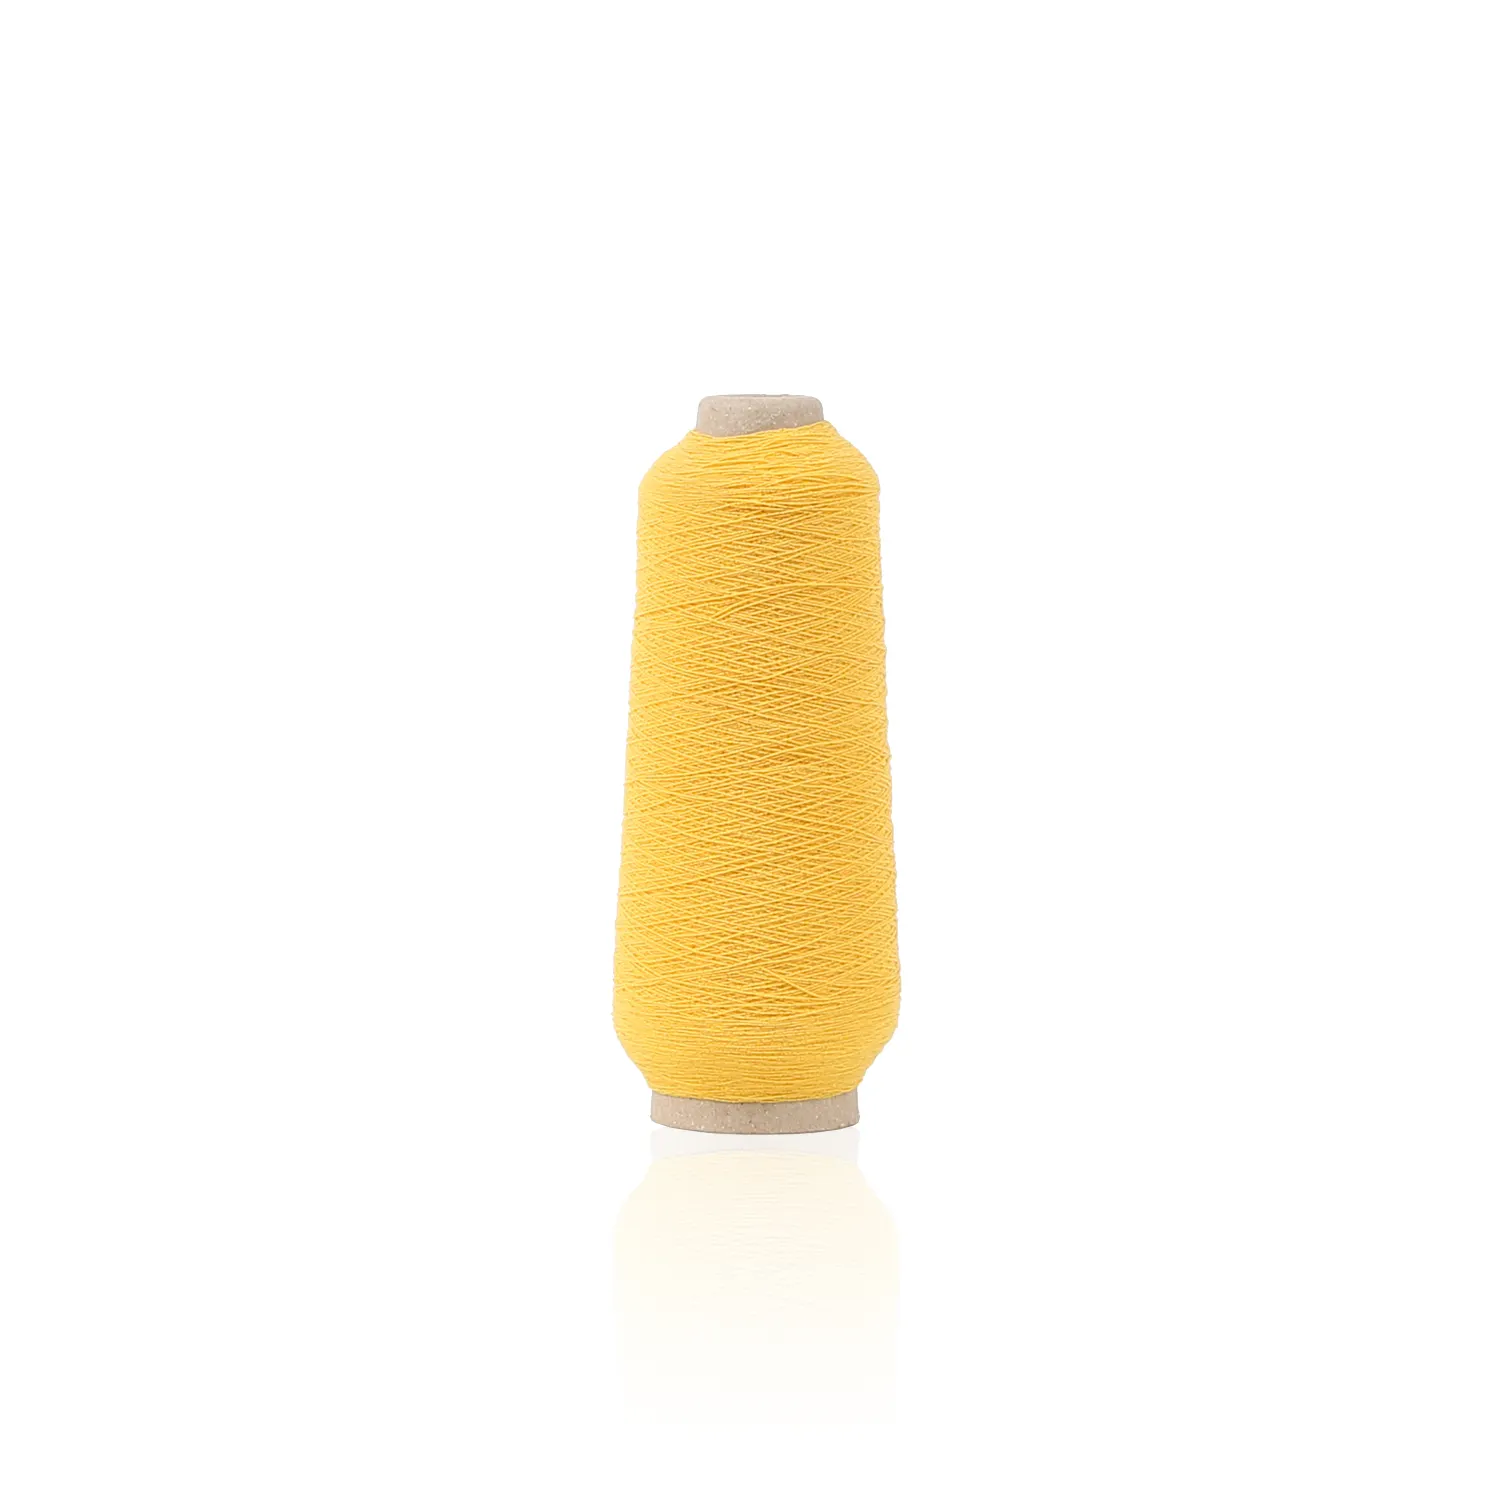 Hot selling Latex Rubber Thread Covered Yarn 100#100100 for Labour Gloves Knitting